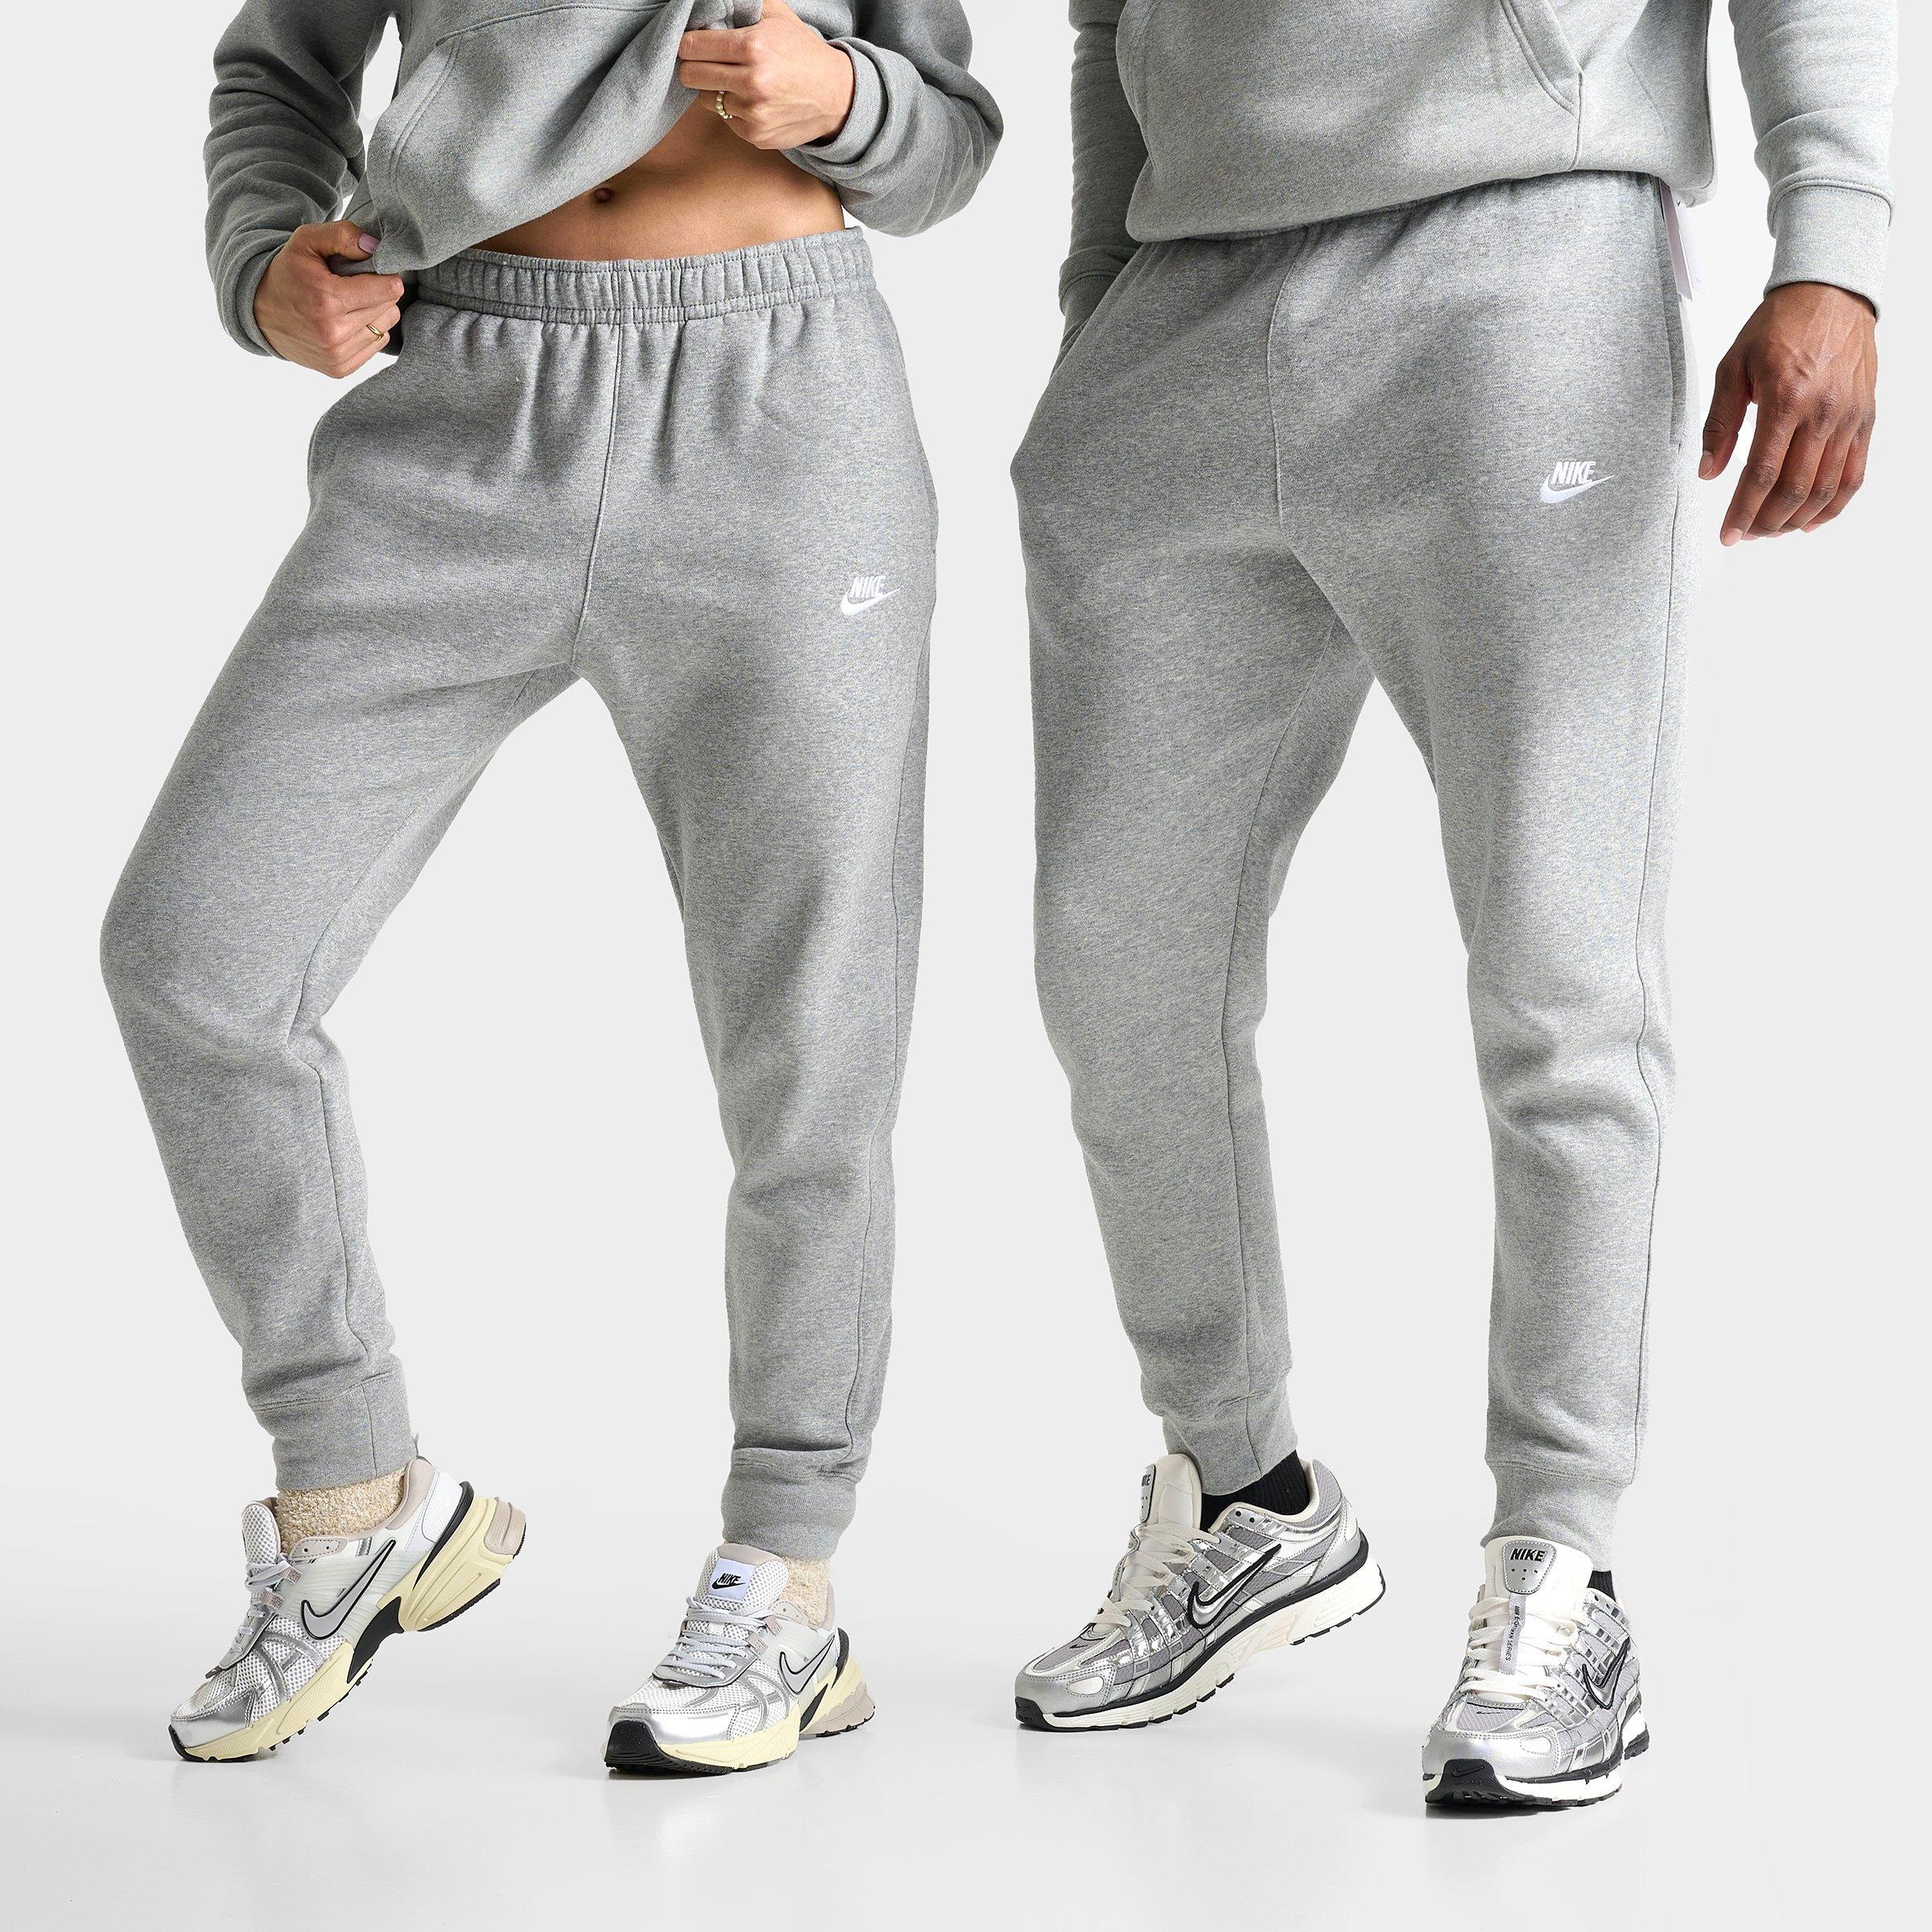 mens nike jogger outfits